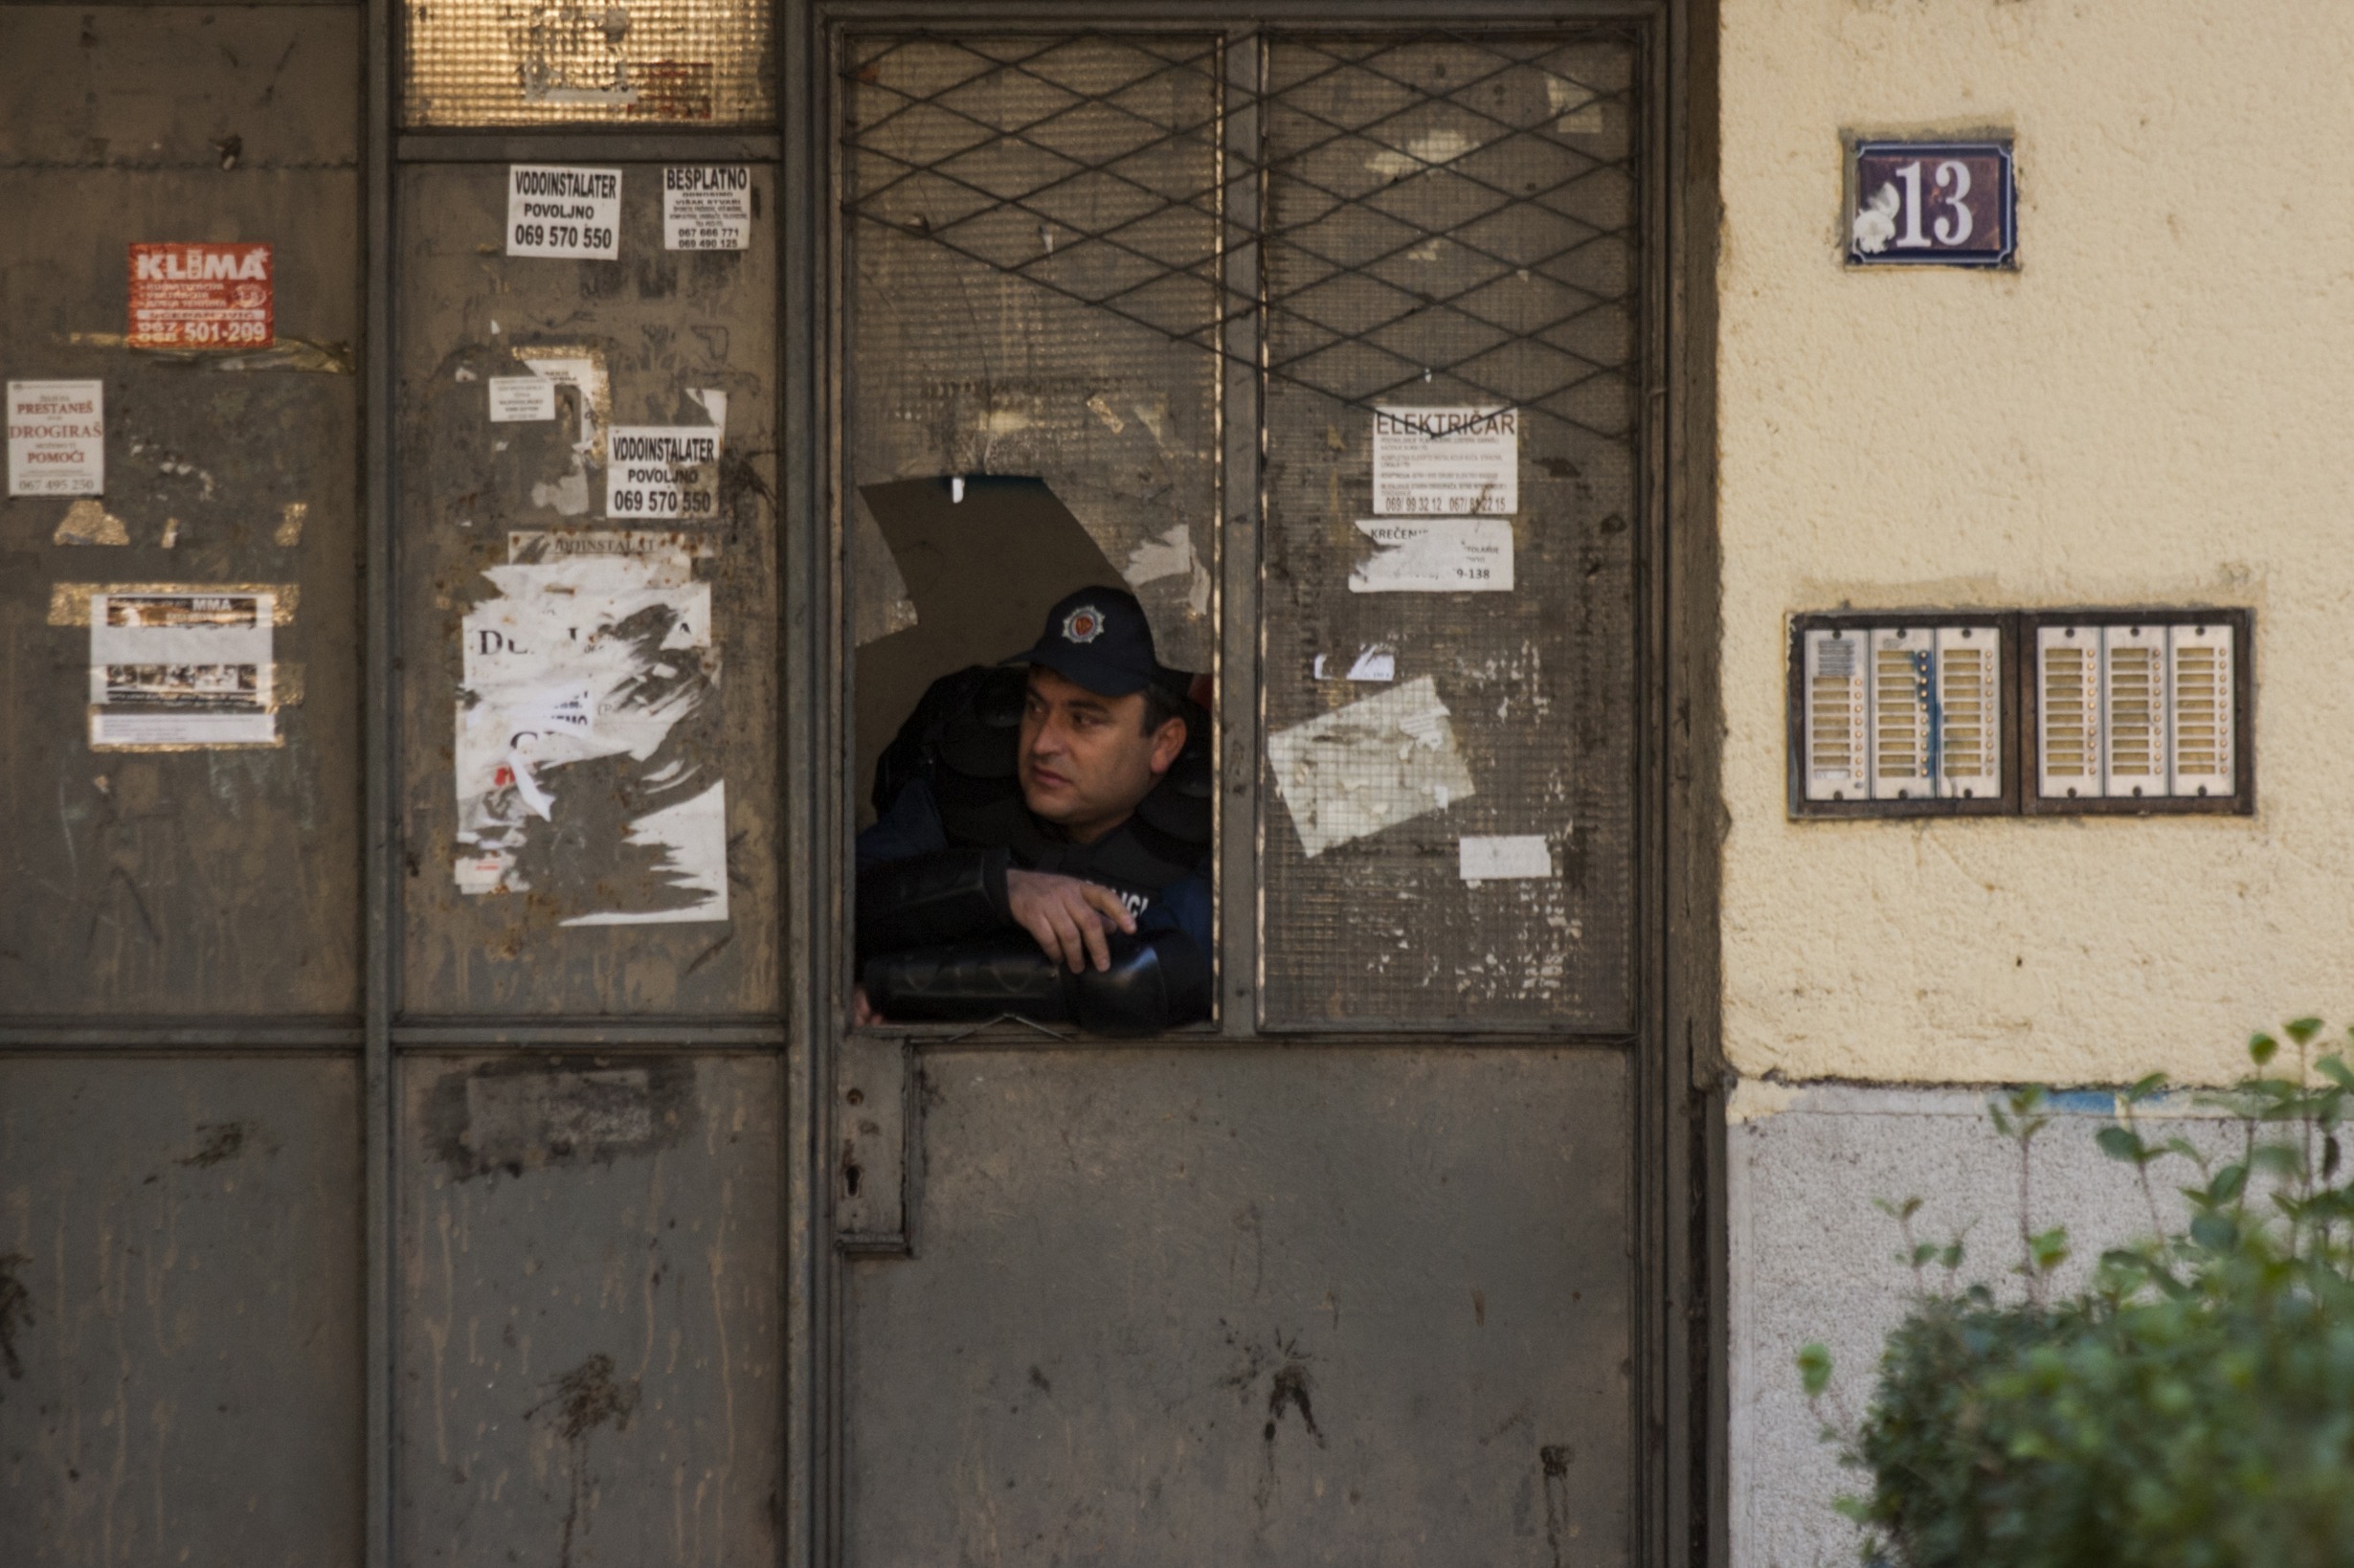 A policeman looks through a broken window near the entrance of a residential building during a Pride March in Podgorica, November 2, 2014. Hundreds of riot police protected about two hundred gay activists who marched peacefully in Montenegro. REUTERS/Stevo Vasiljevic (MONTENEGRO - Tags: SOCIETY)